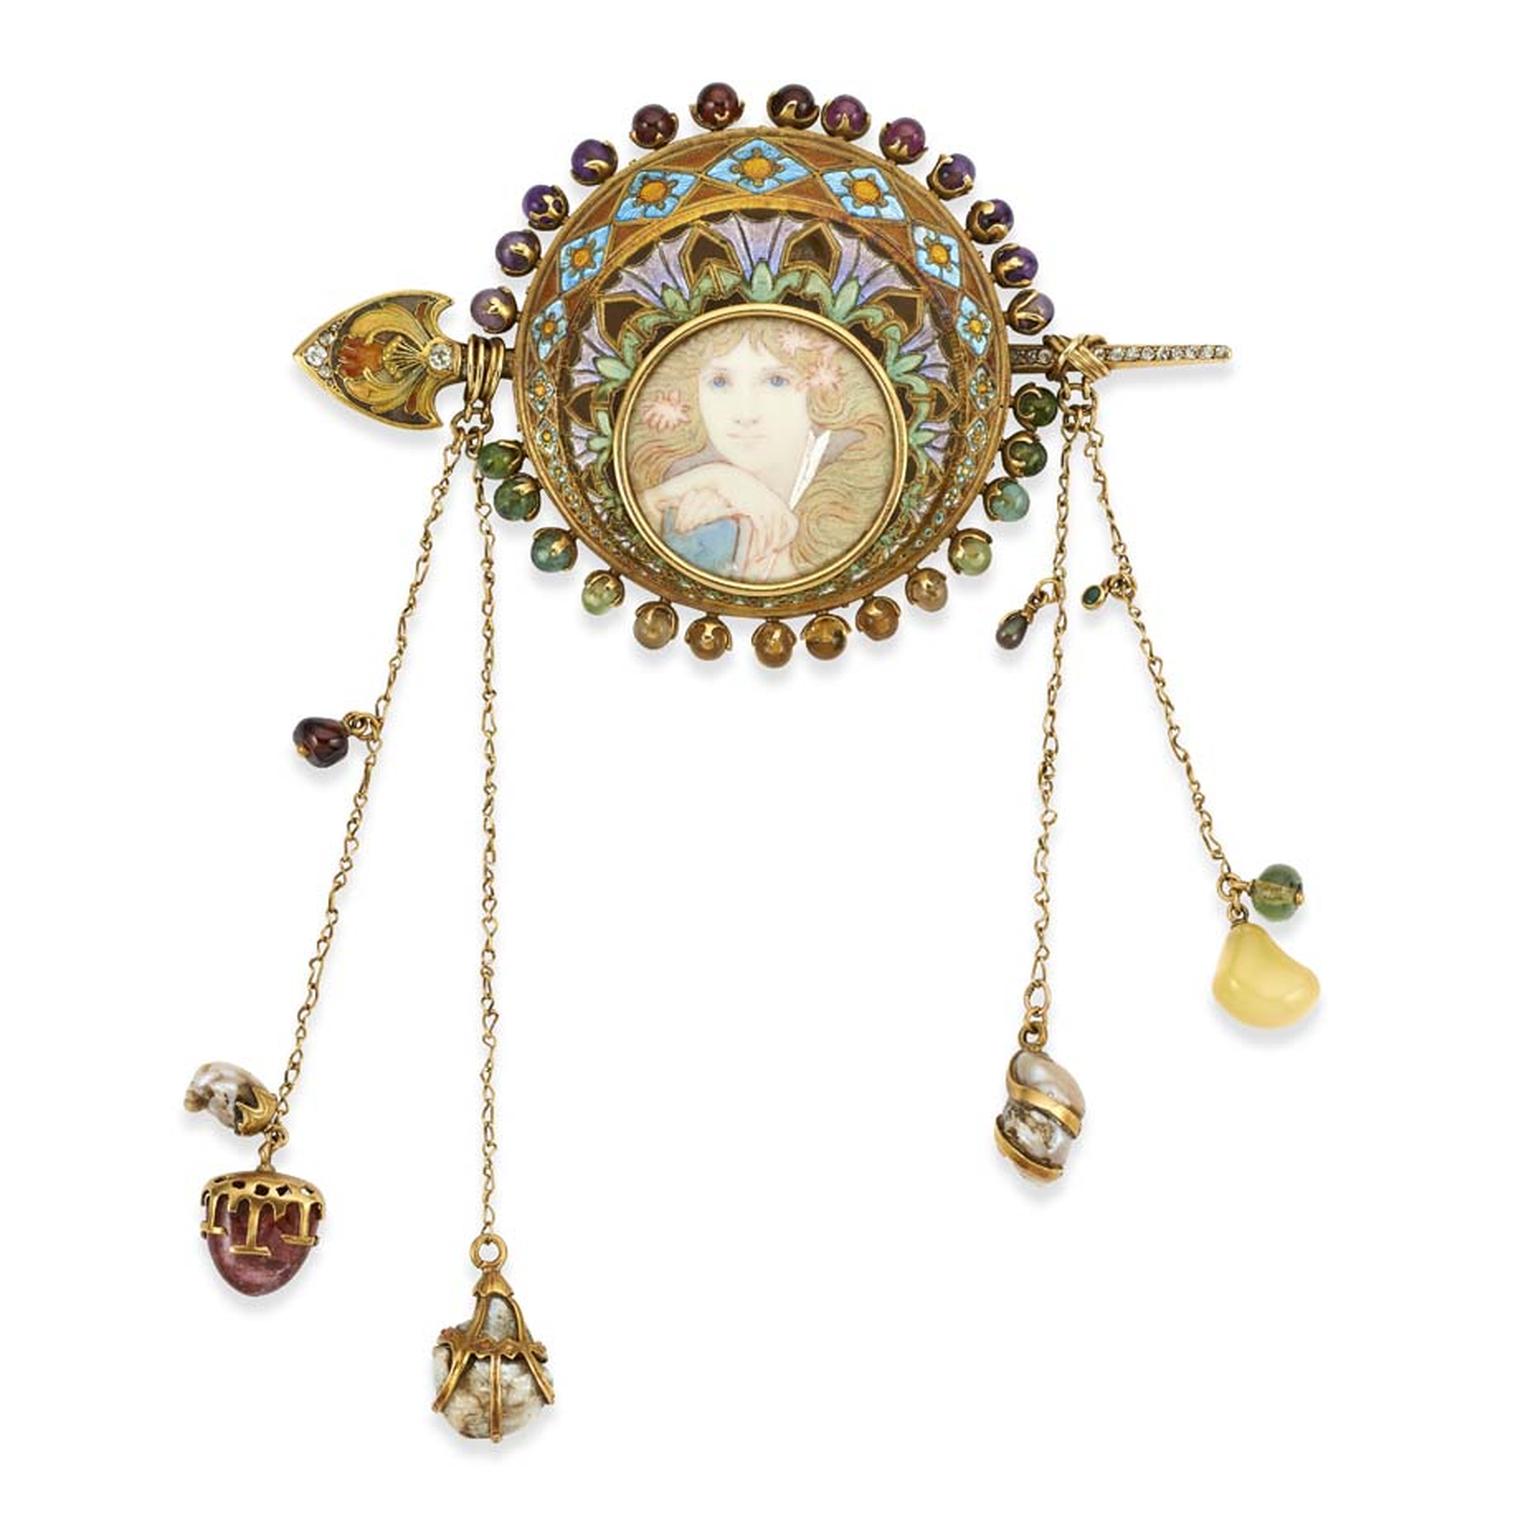 Gold corsage designed by the painter Alphonse Mucha and crafted by the French jeweller George Fouquet. Offered for sale at TEFAF by British antique dealers Wartski.